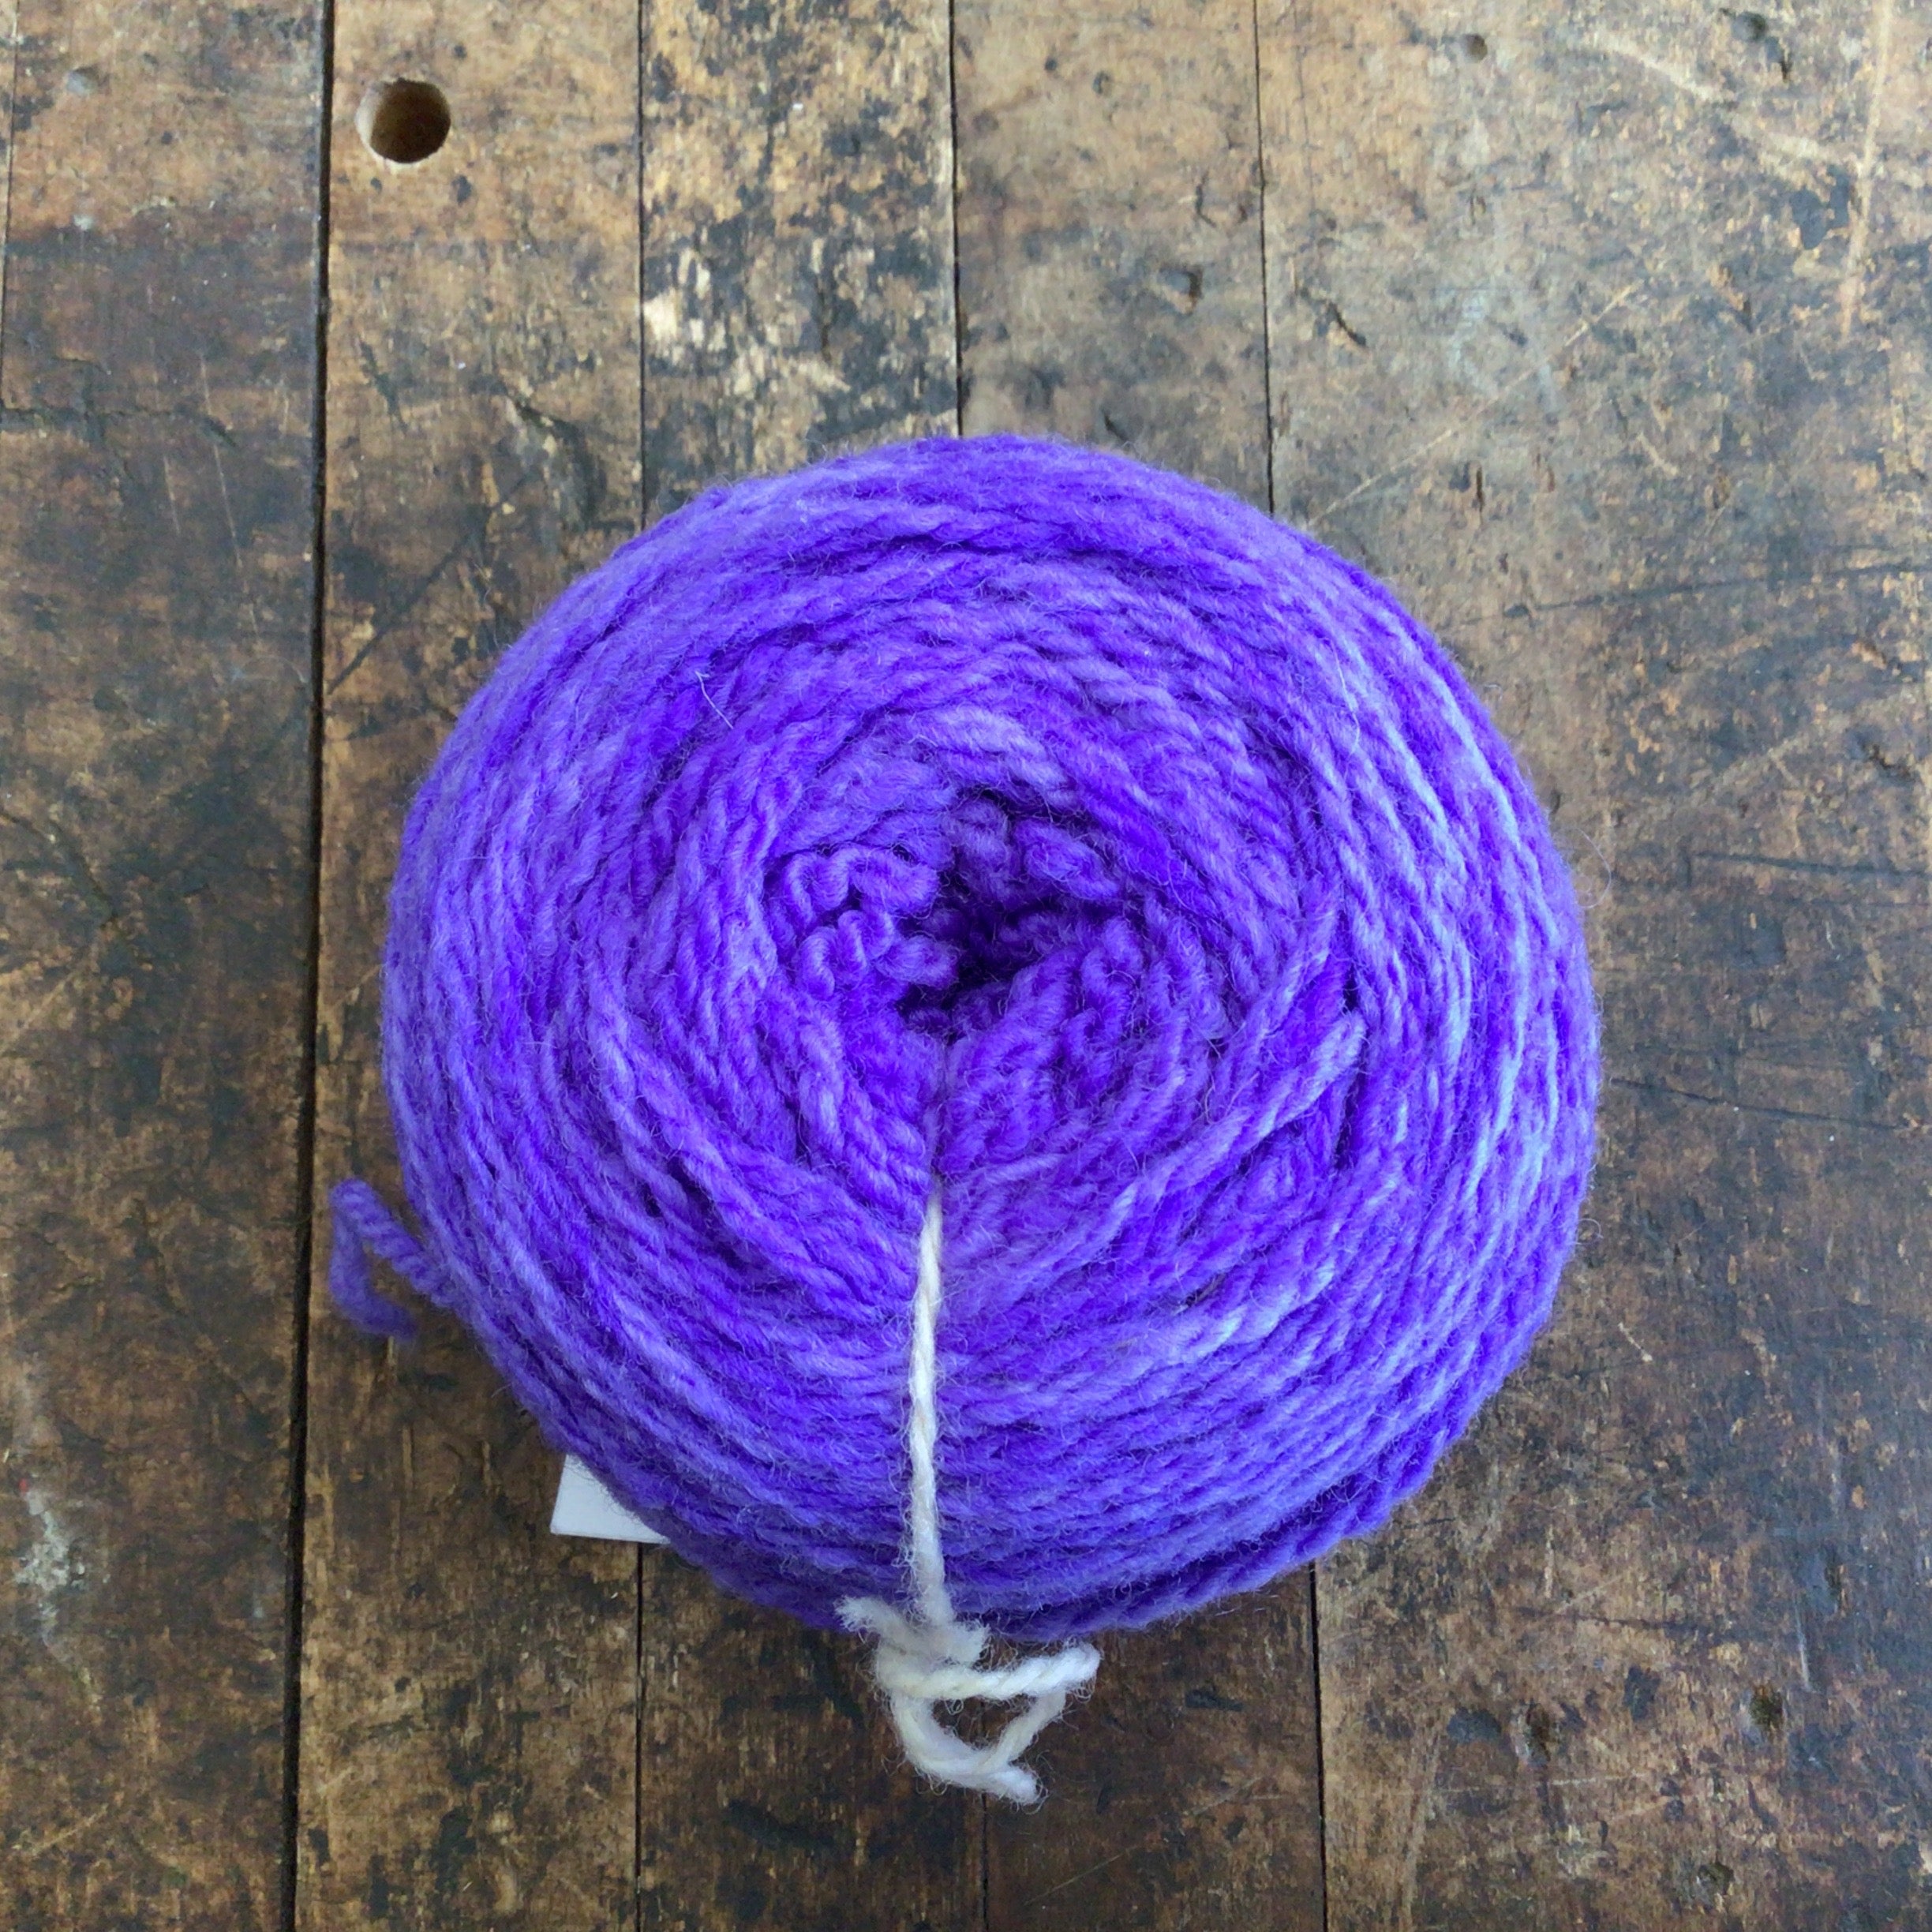 Tronstad Ranch Rambouillet 2 Ply Worsted Weight Yarn - Ultra Violet